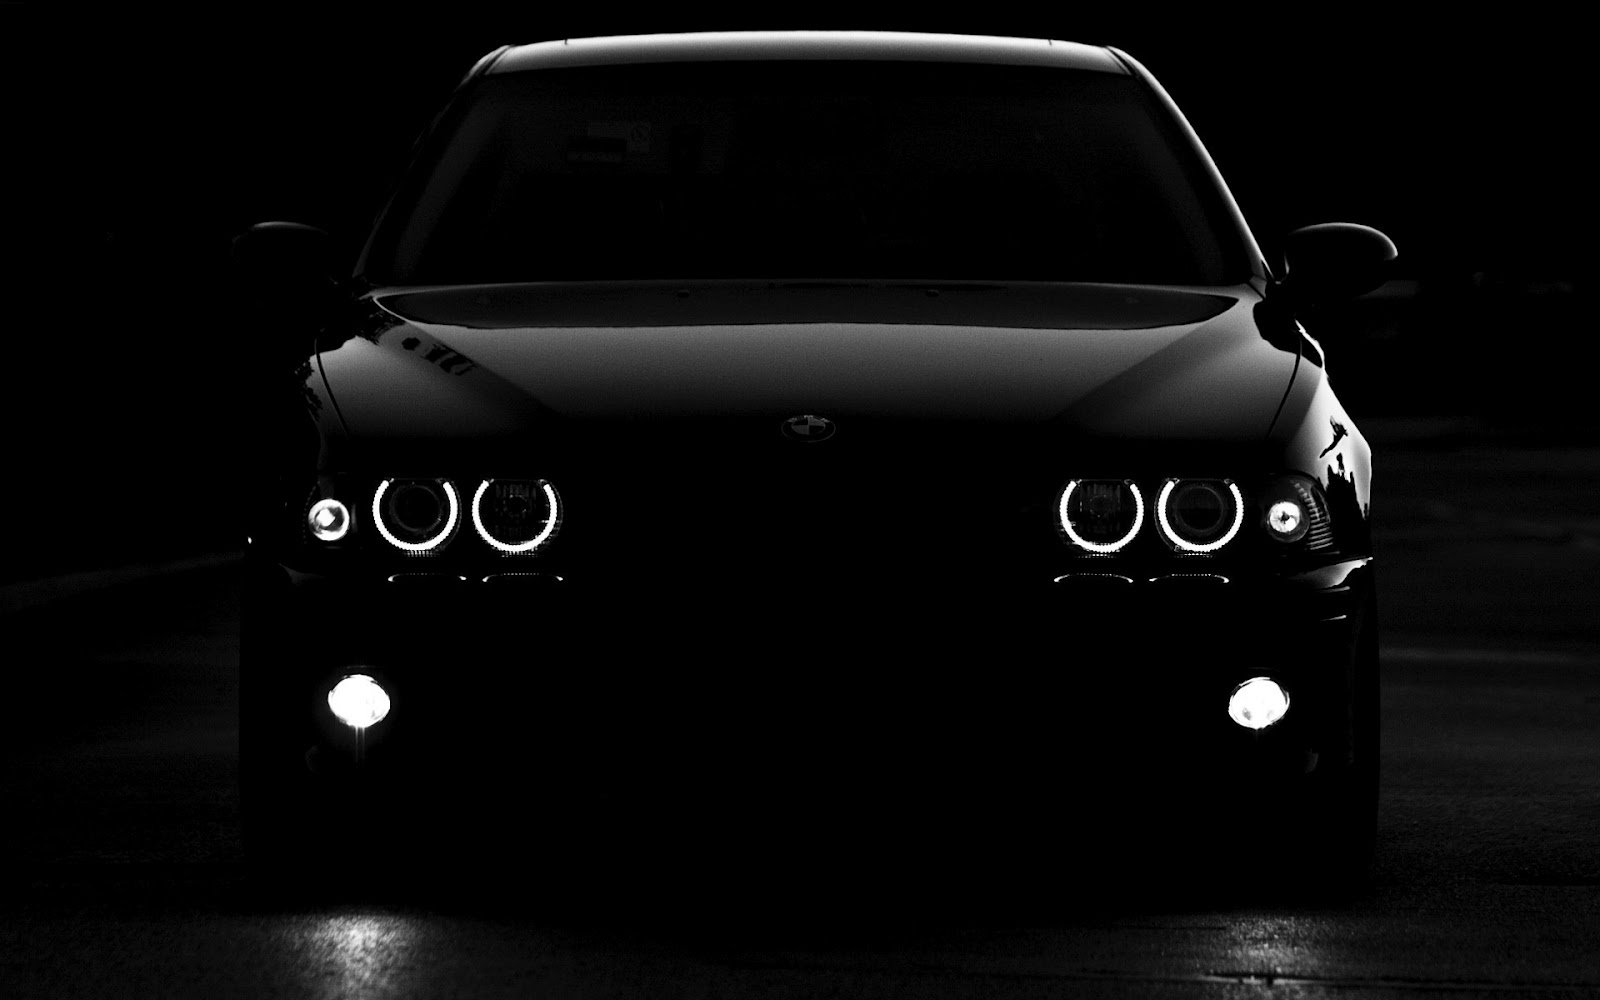 Black Car Background 5897 Hd Wallpapers in Cars   Imagescicom